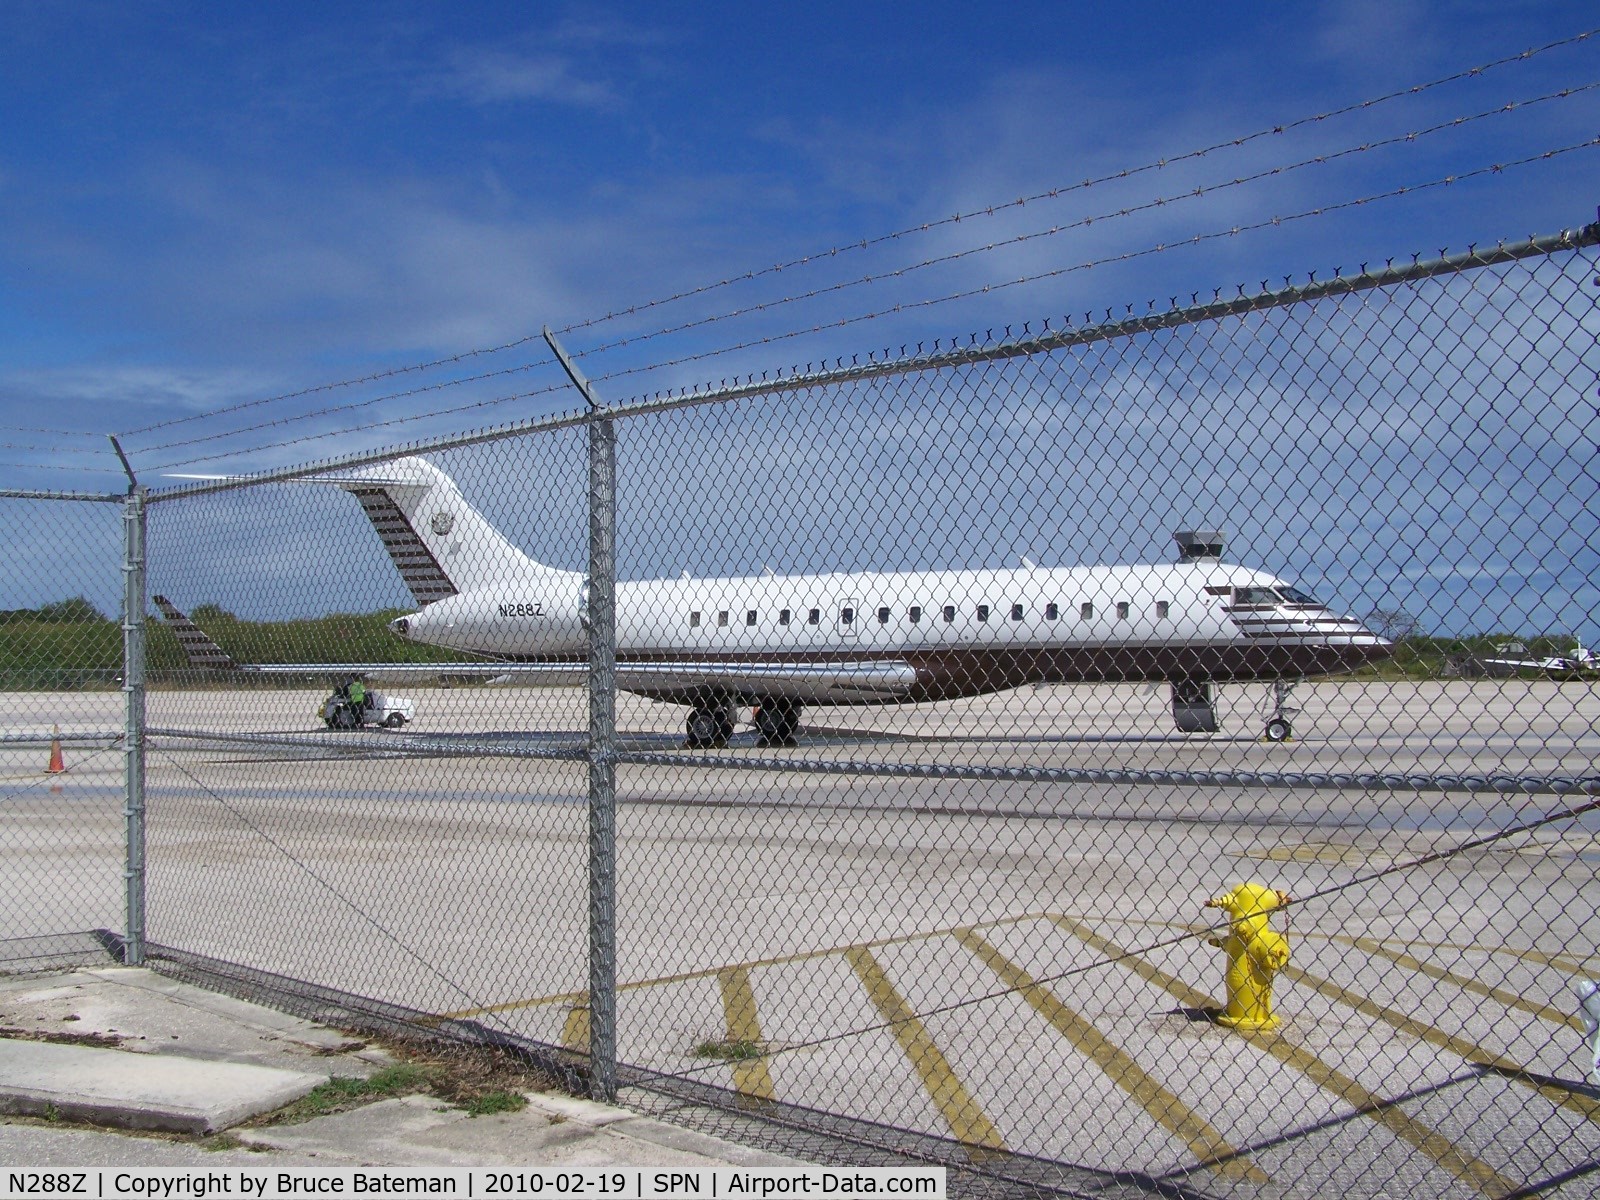 N288Z, 2007 Bombardier BD-700-1A10 Global Express XRS C/N 9228, Sitting on the tarmac on Saipan Island in the Pacific